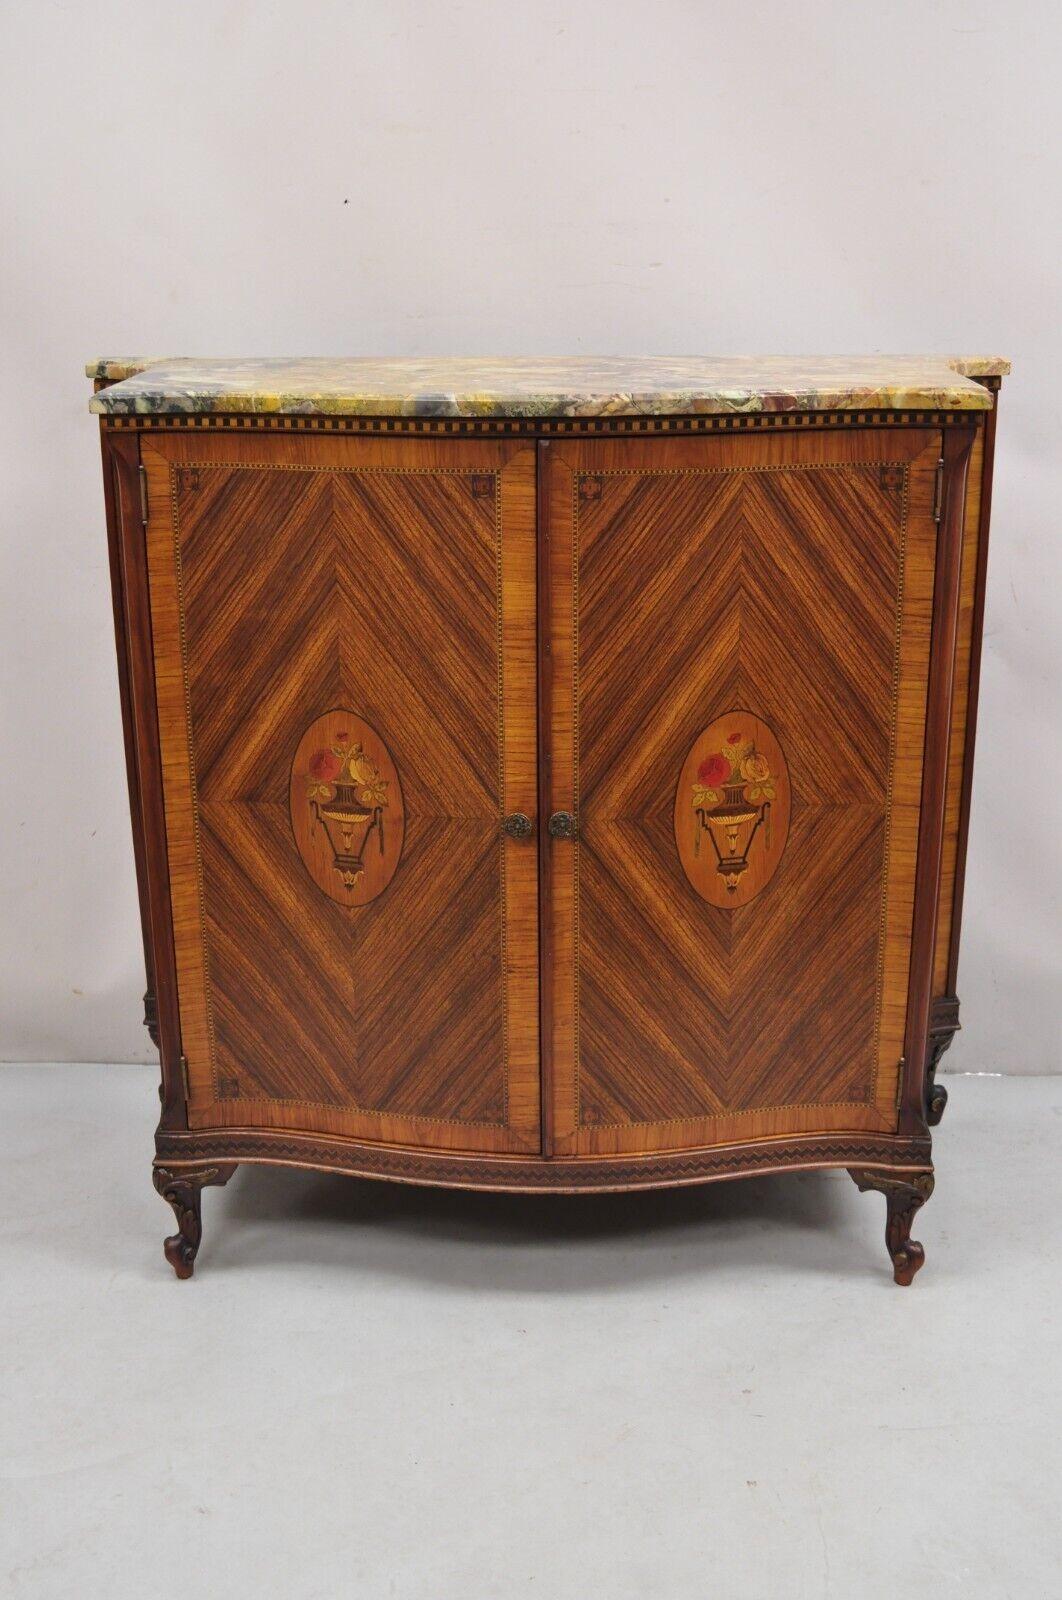 Antique French Louis XV Style Rouge Marble Top Demilune Dresser Cabinet with 5 Drawers. Item features sunburst inlay throughout, floral bouquet inlay to door fronts, concave sides, 2 swing doors which conceal 5 dovetail constructed drawers, very